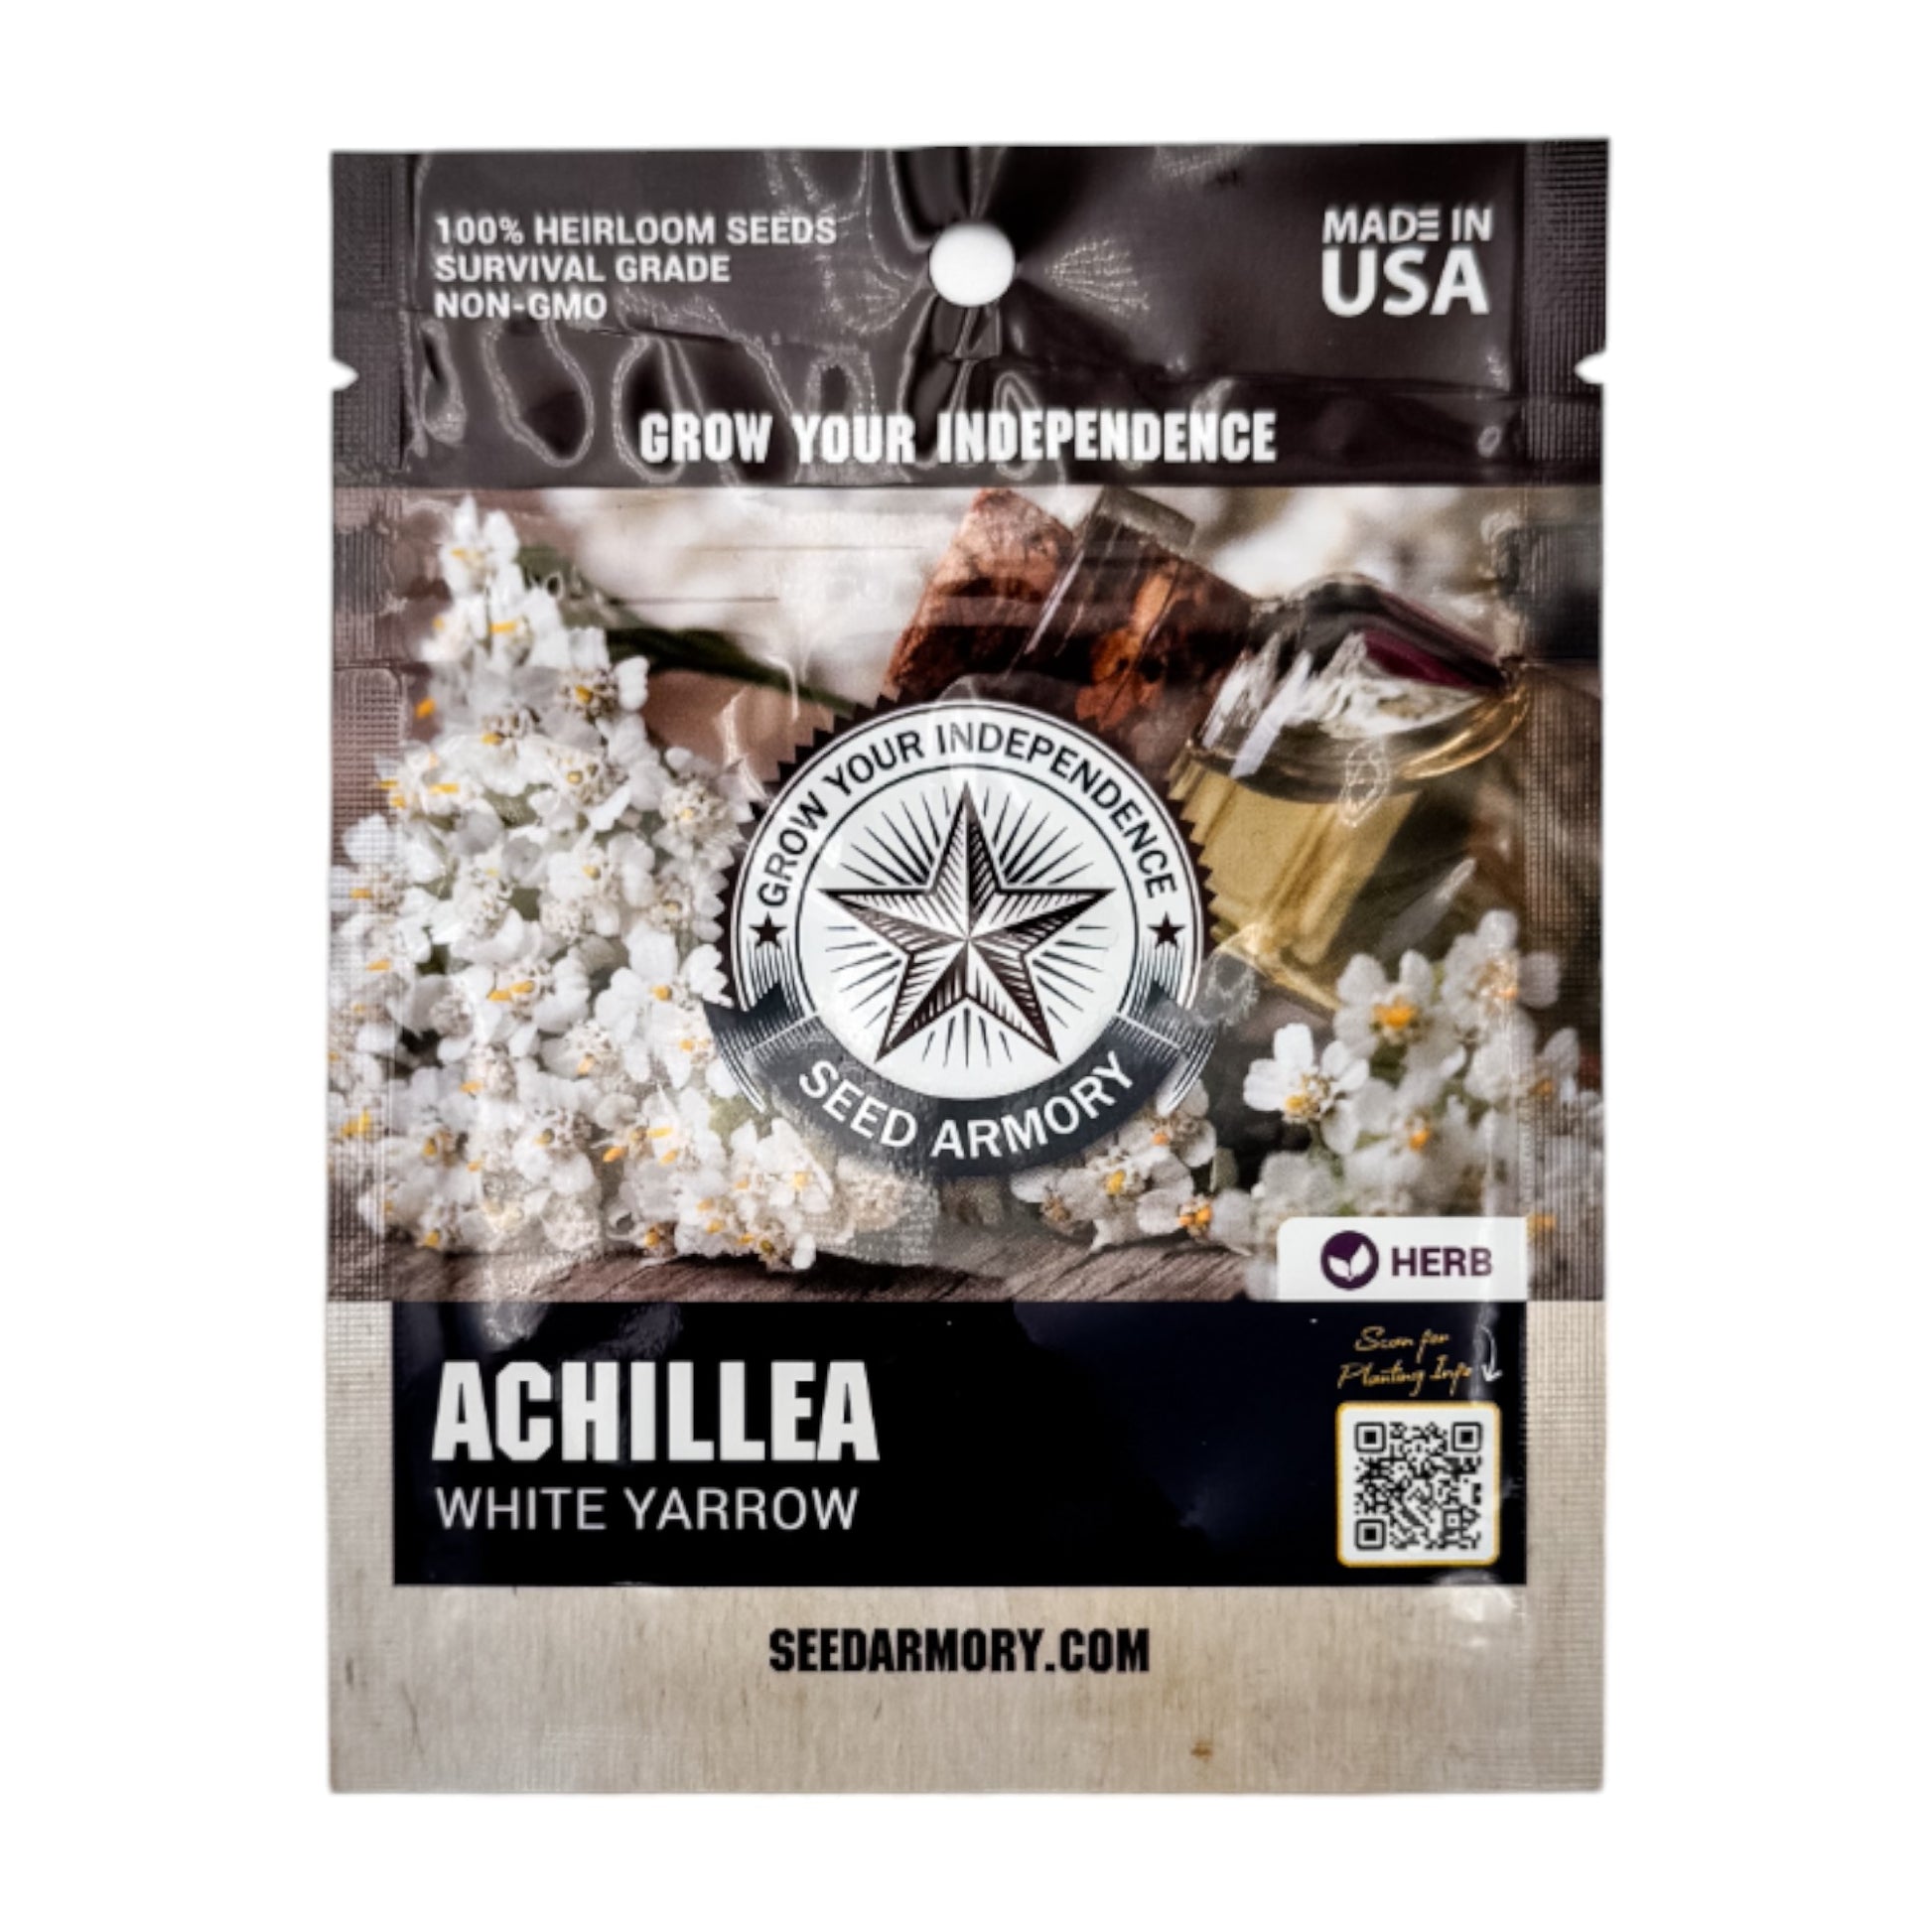 Achillea Seeds- White Yarrow product packaging front view